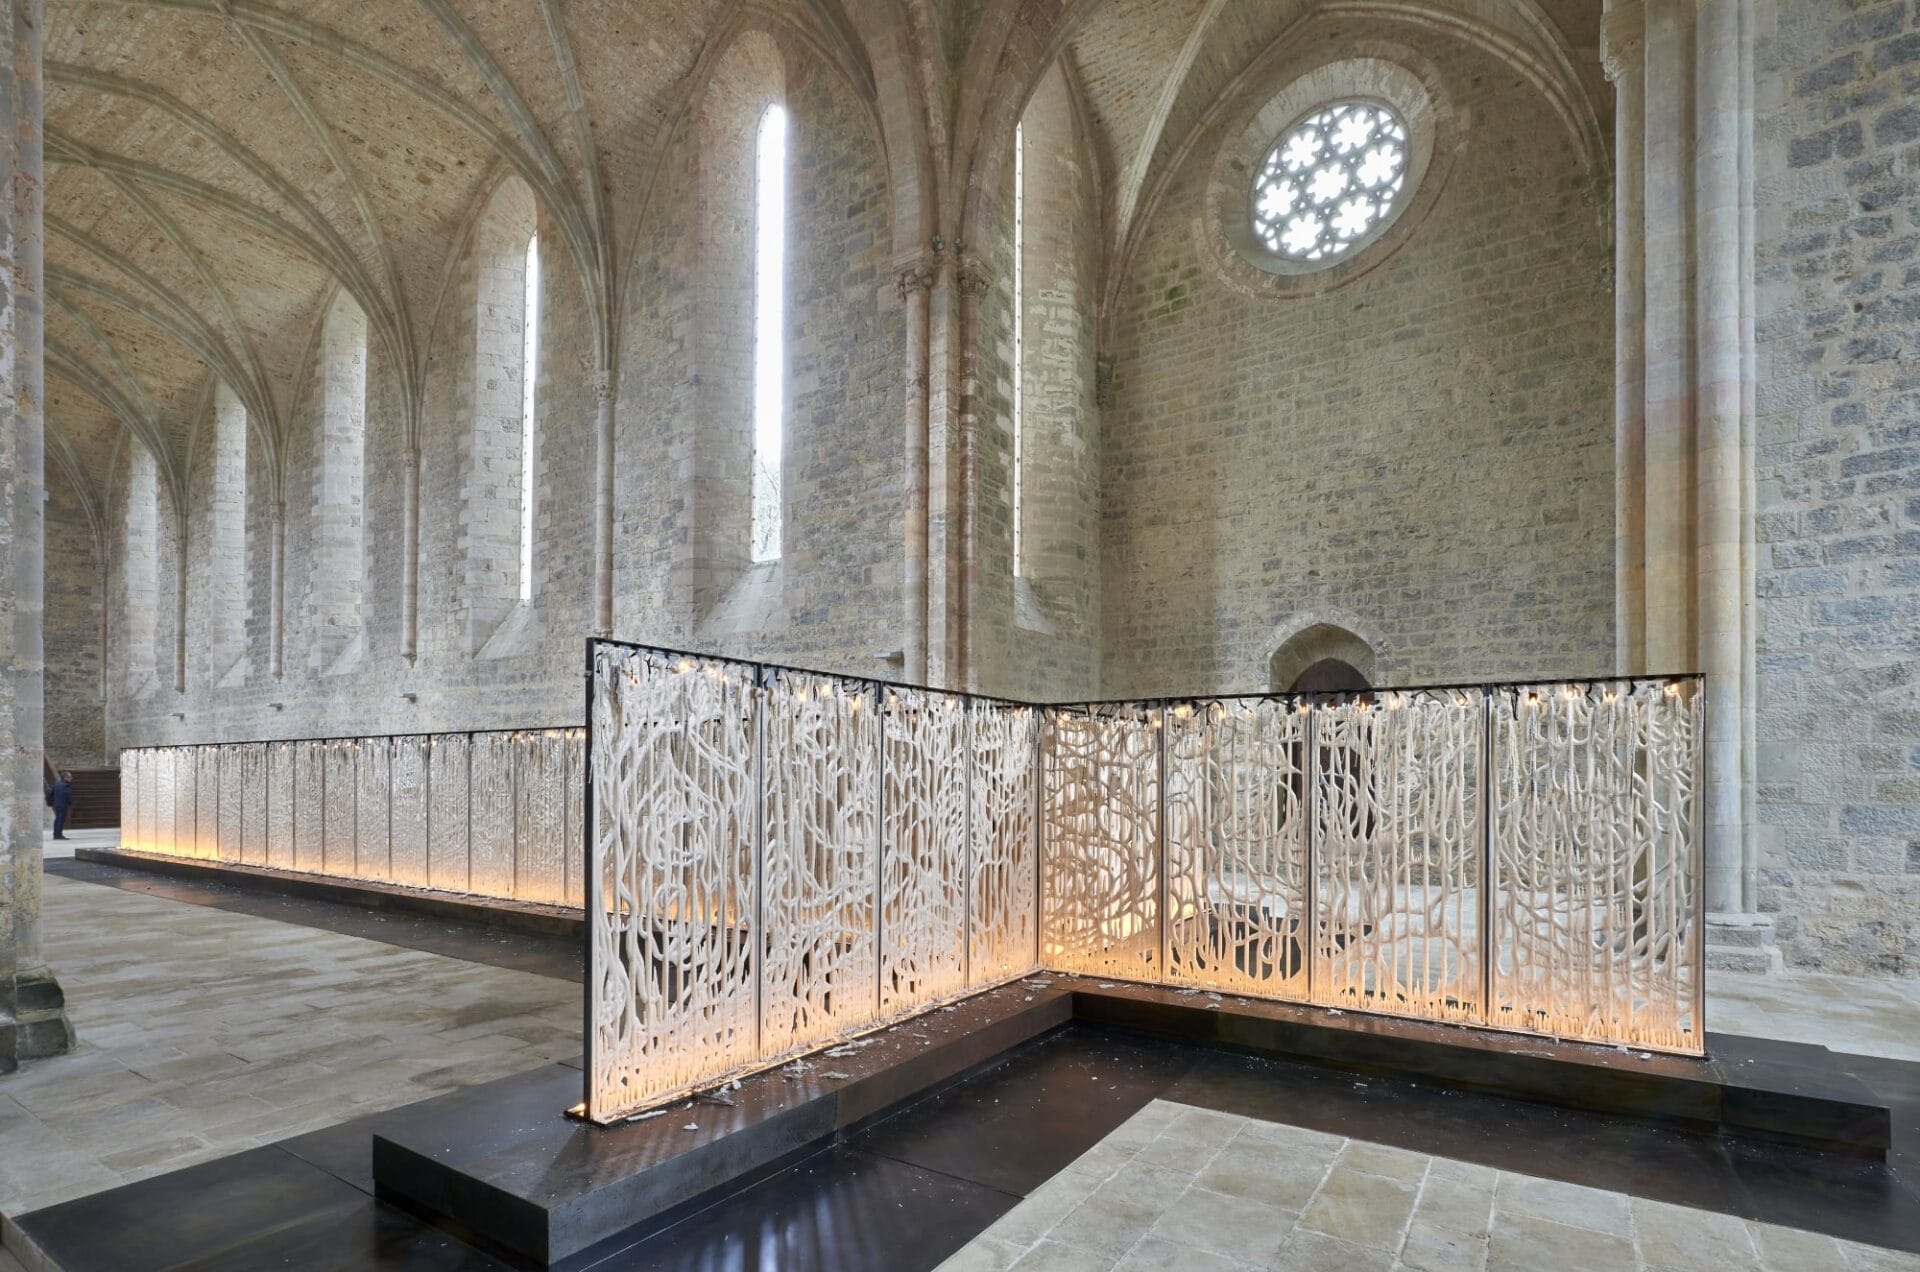 a large cross shaped installation with panels of wax stands in an ornate brick hall